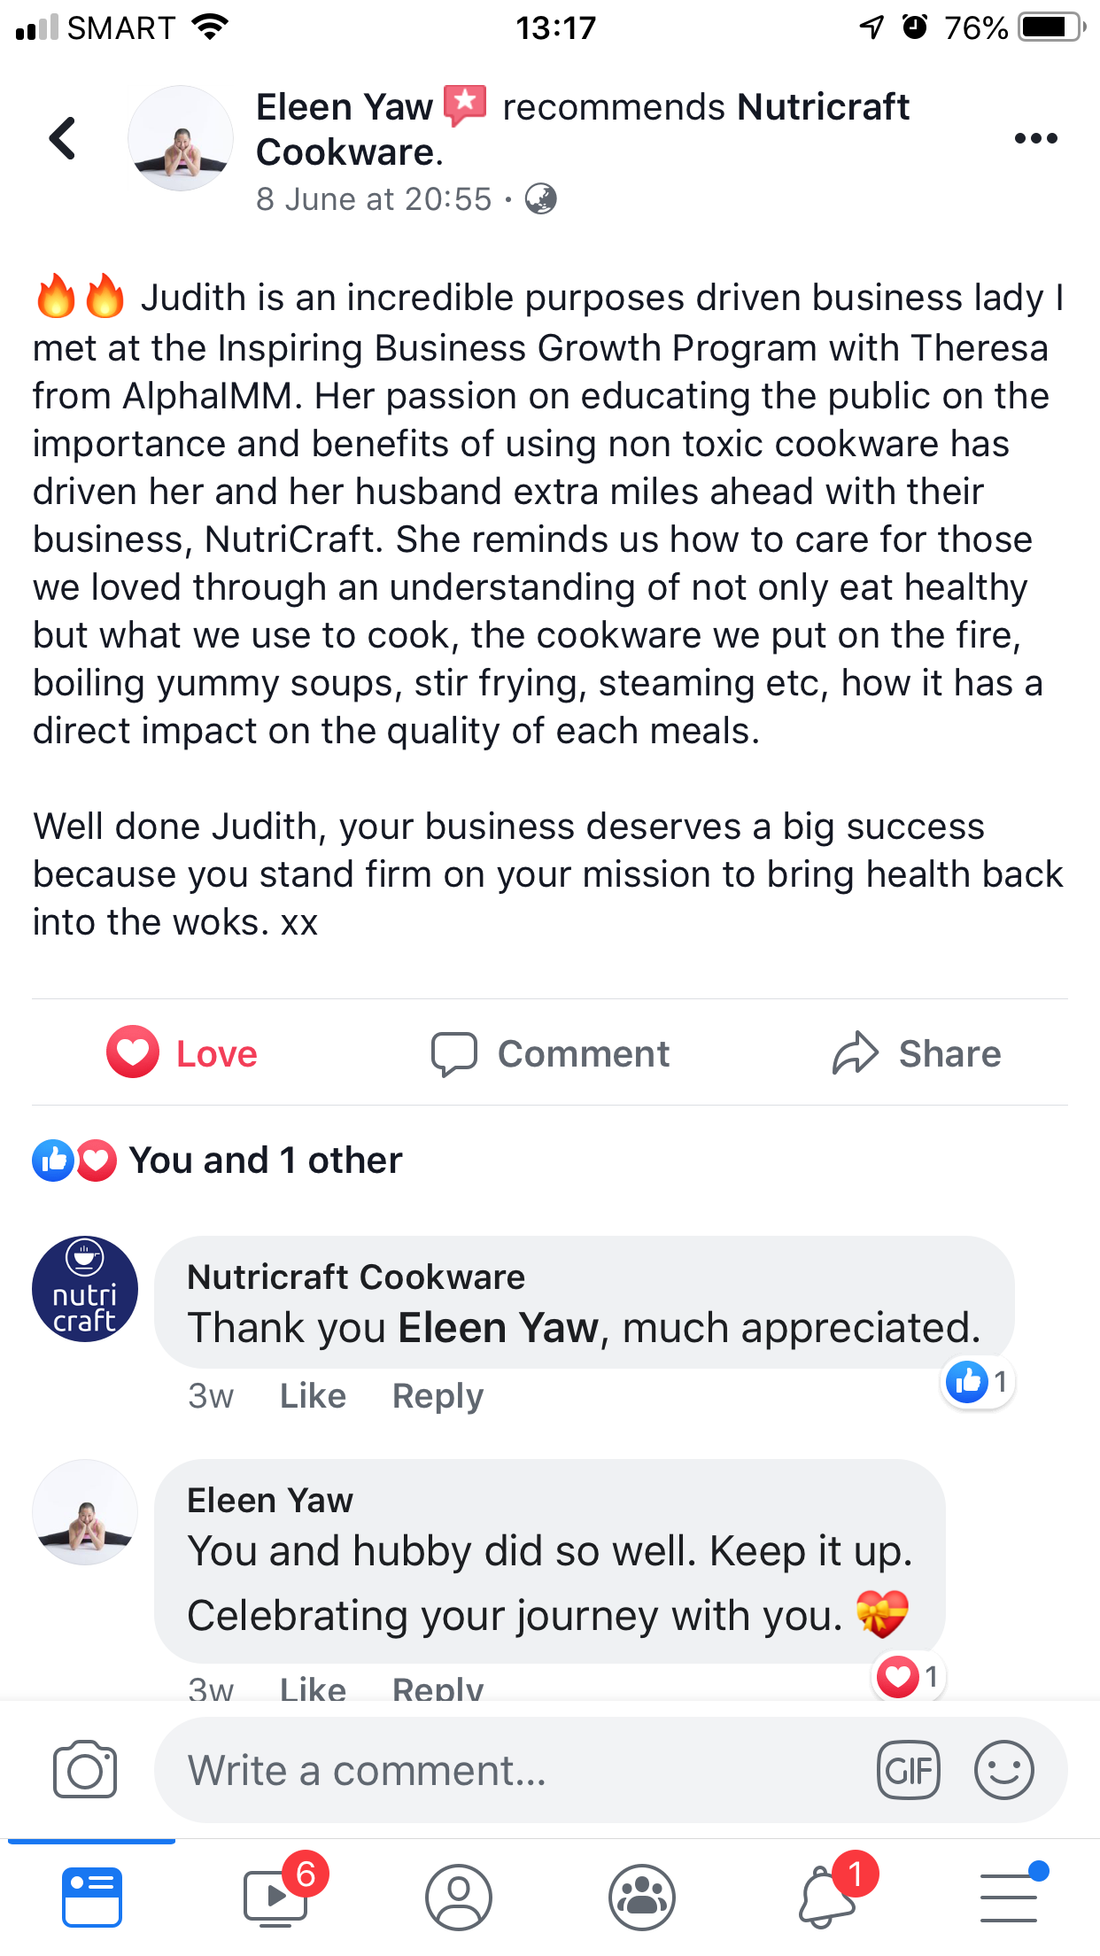 Eleen Yaw: Judith is an incredible purposes driven business lady!